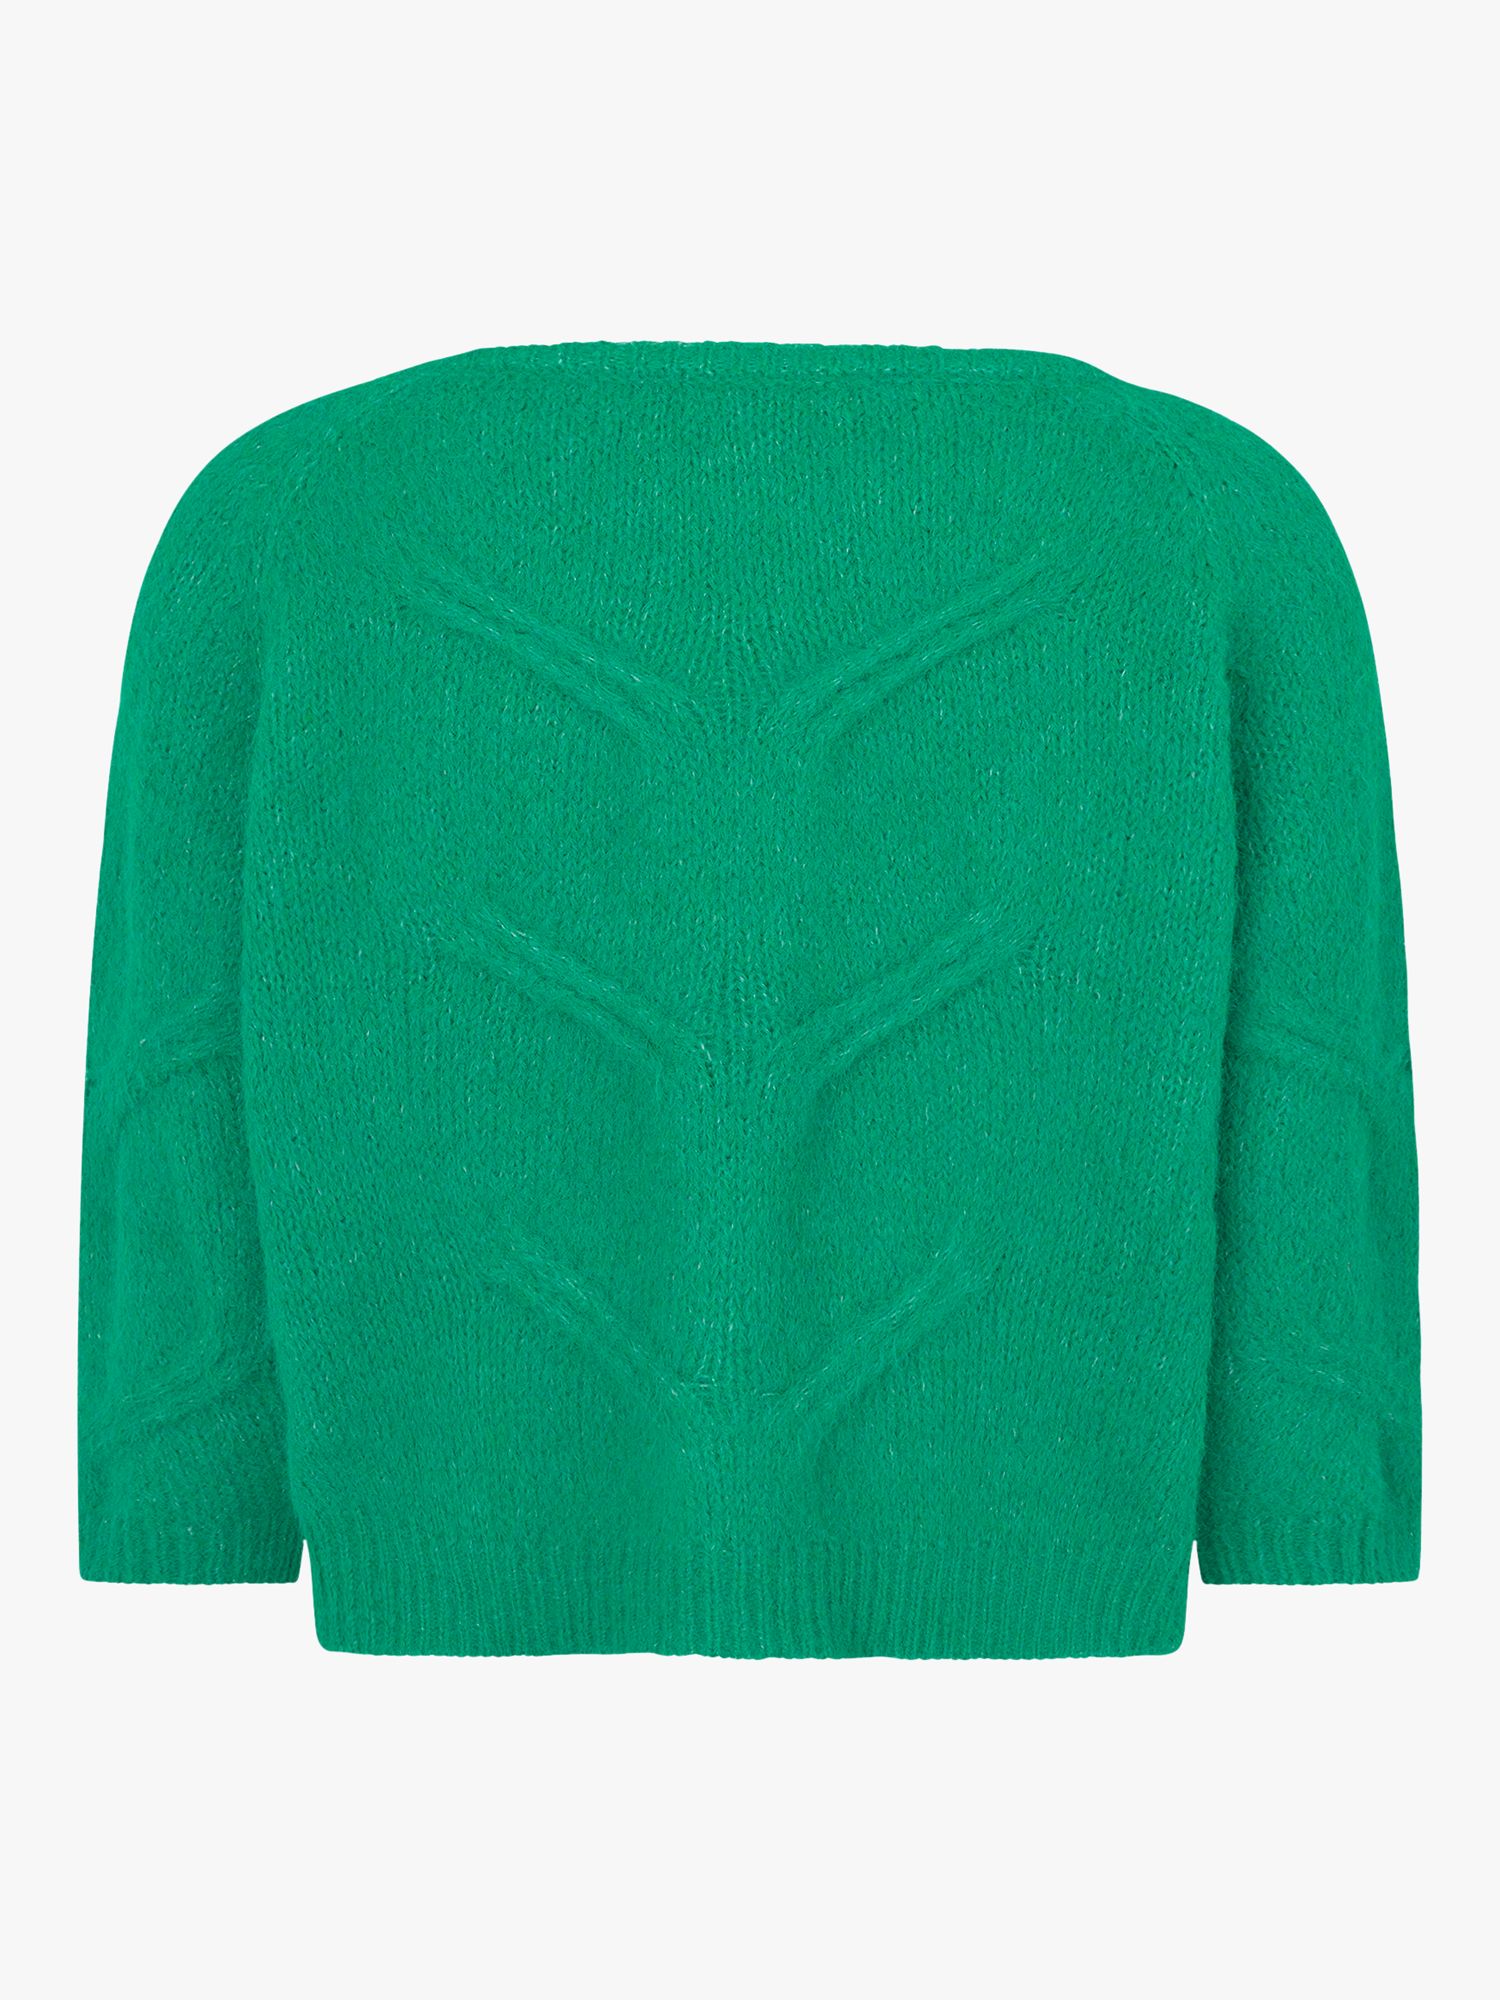 Buy Lollys Laundry Tortuga Relaxed Fit Jumper, Emerald Green Online at johnlewis.com